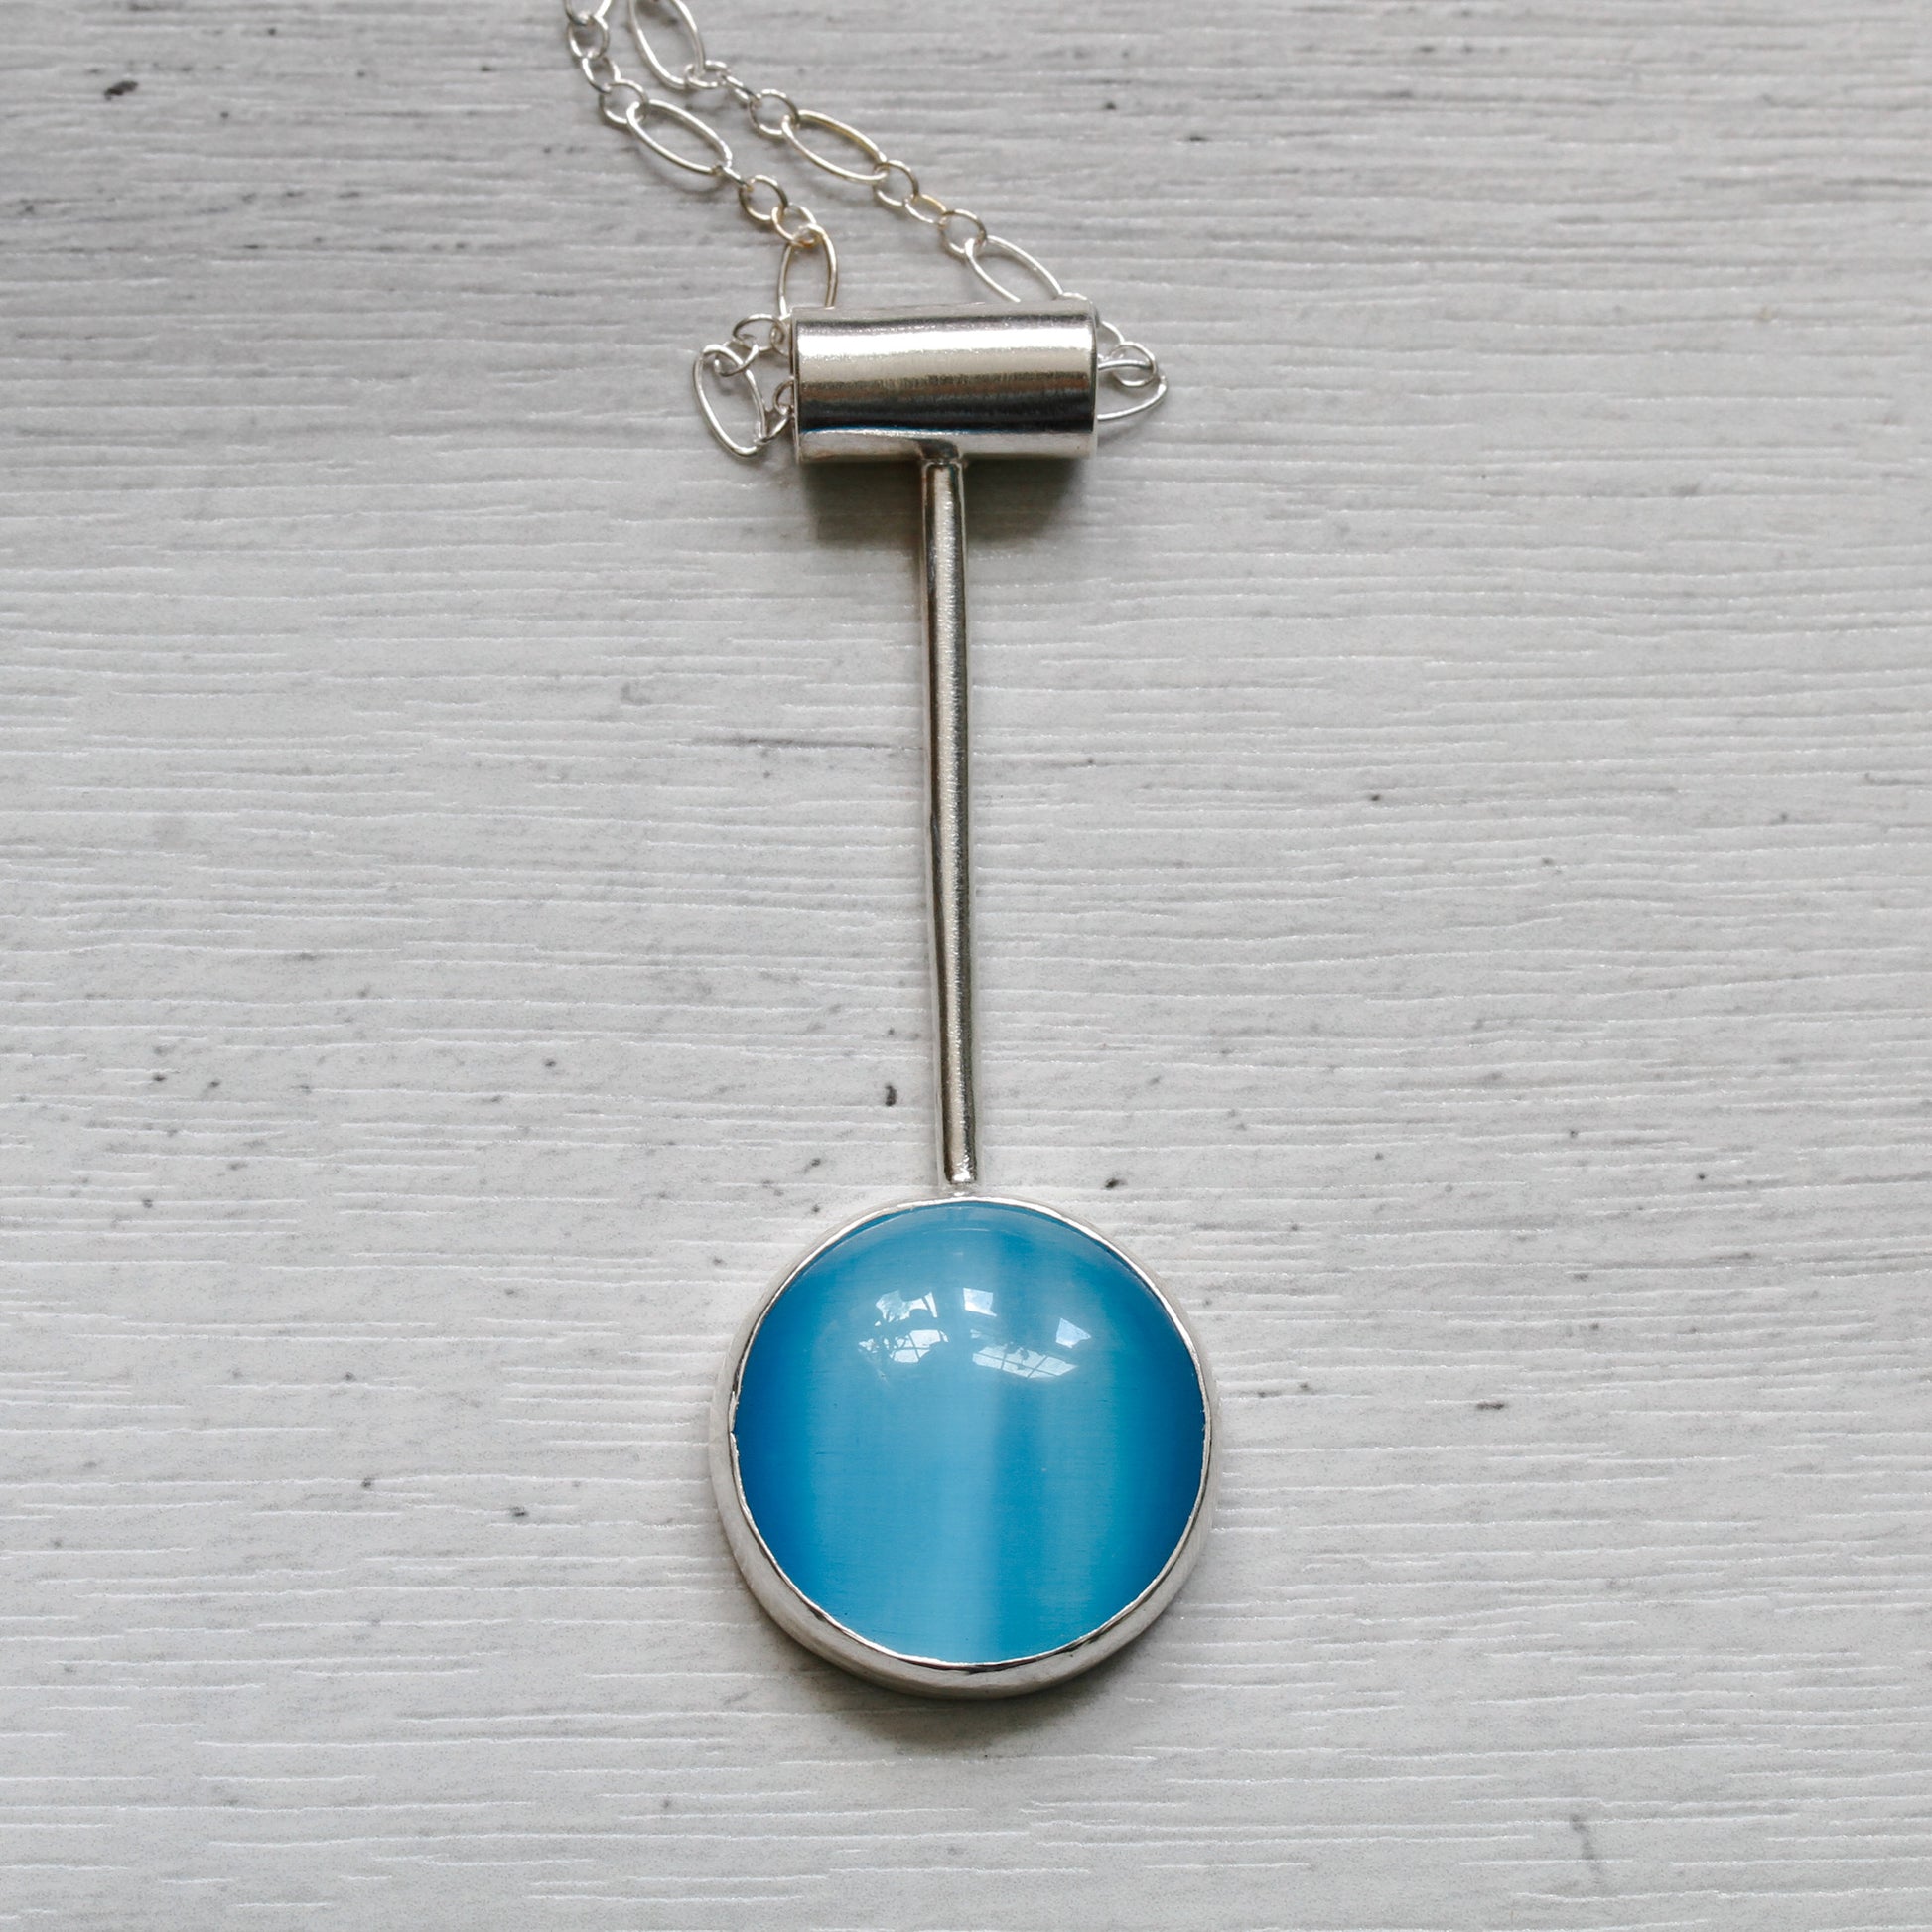 Turquoise blue cat's eye sterling silver necklace in minimalist design